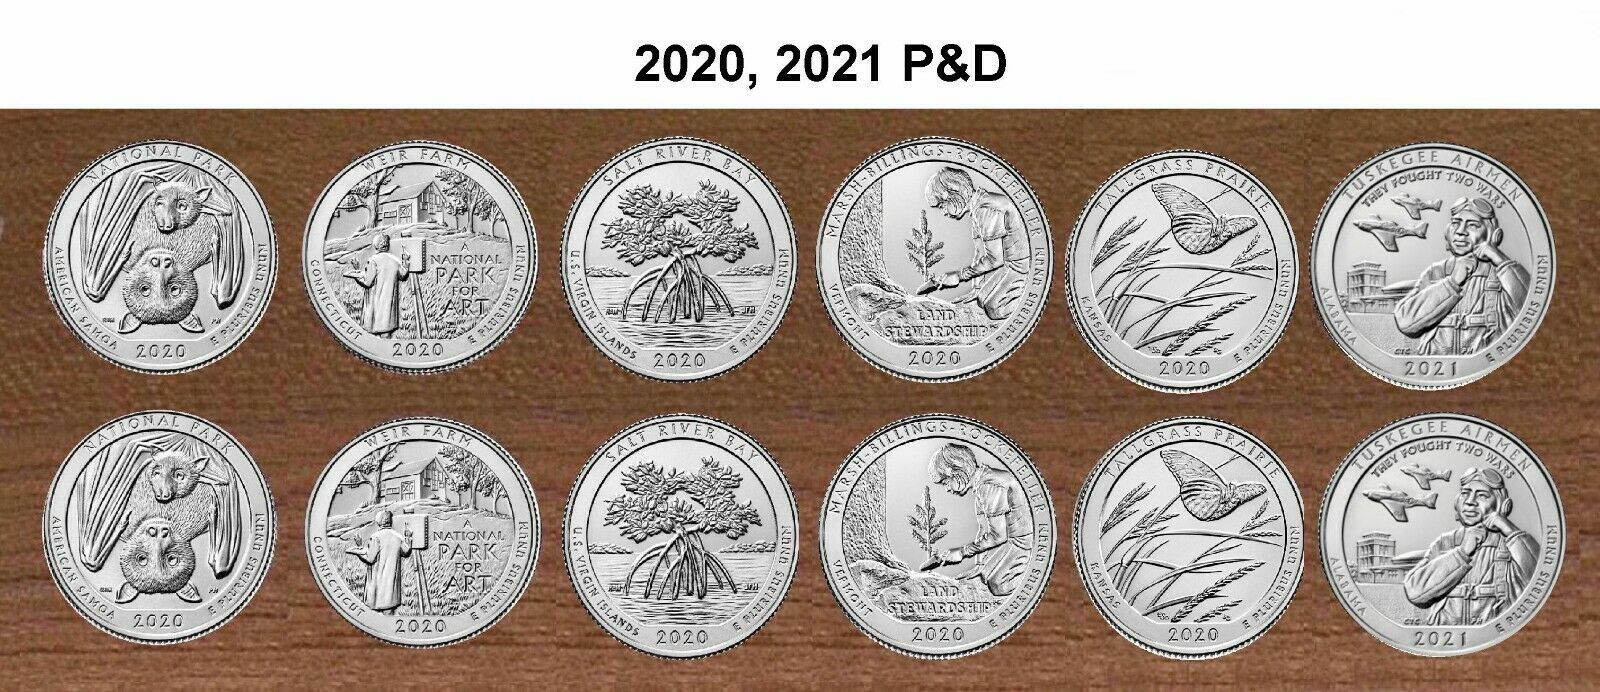 2020, 2021 National Park Quarters  P& D  All 6 Sets 12 Coins In Stock